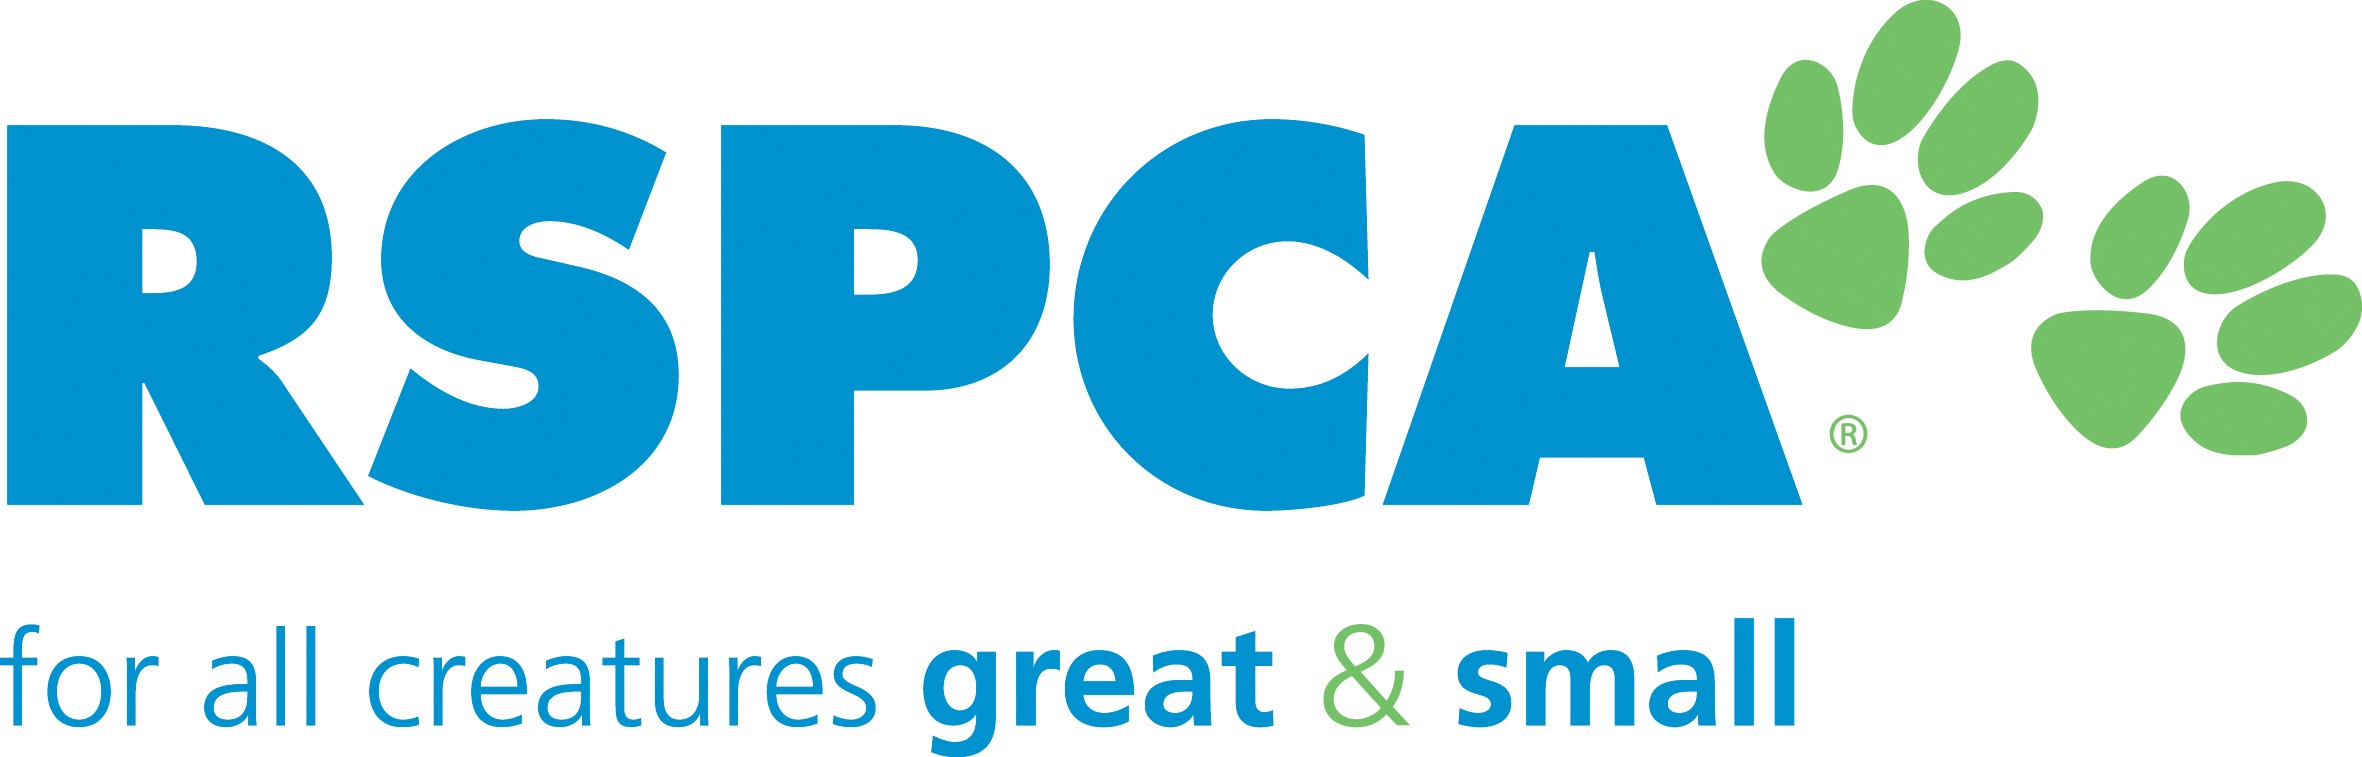 Where Does Rspca Stand On Militant Anti Farm Activism?   Beef Central - Rspca, Transparent background PNG HD thumbnail